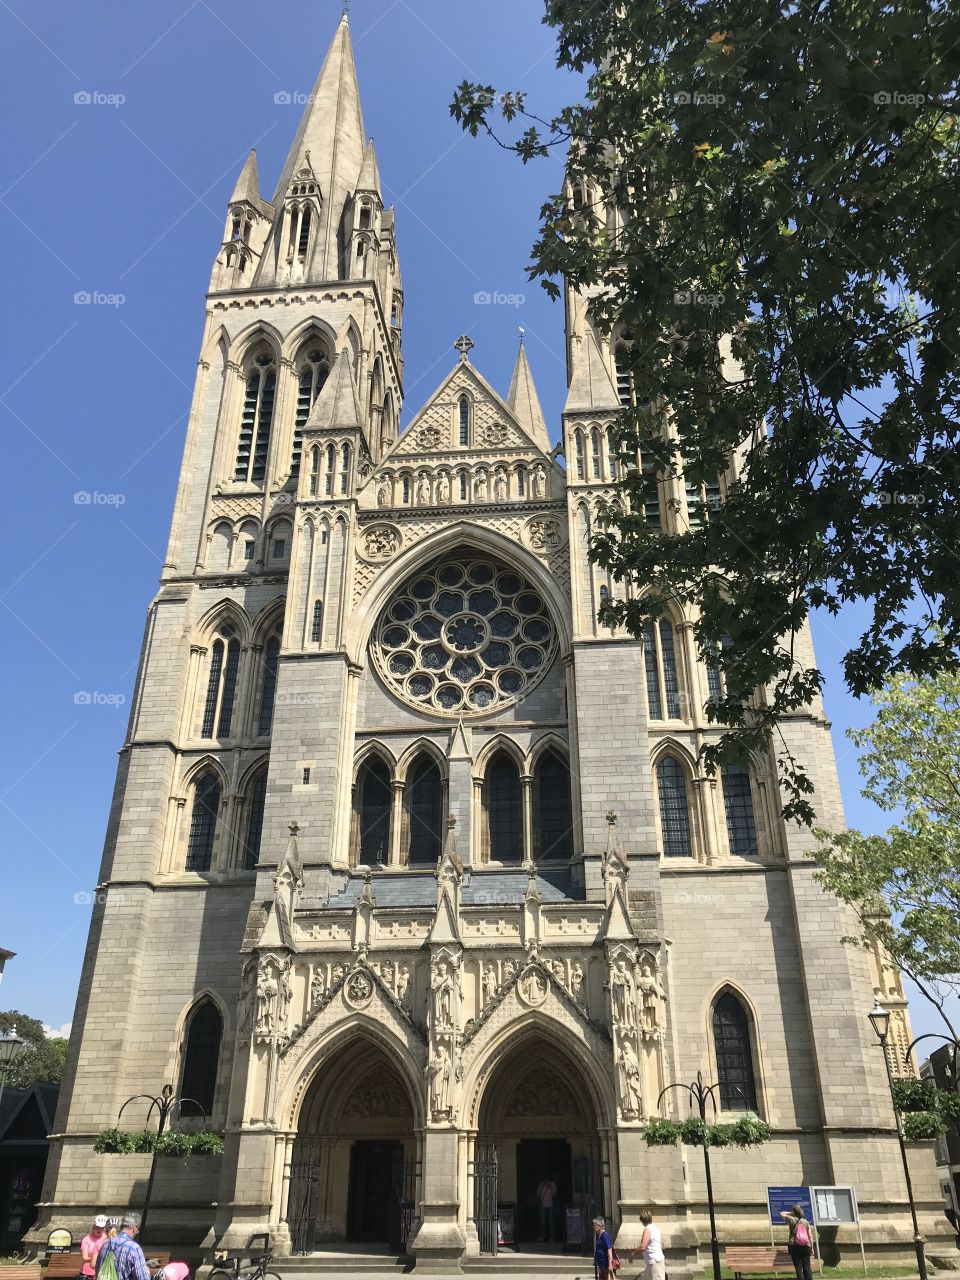 Truro Cathedral arose from the Victorian era, it stand right in the heart of this capital city and is one of the most beautiful buildings l have seen of its genre.